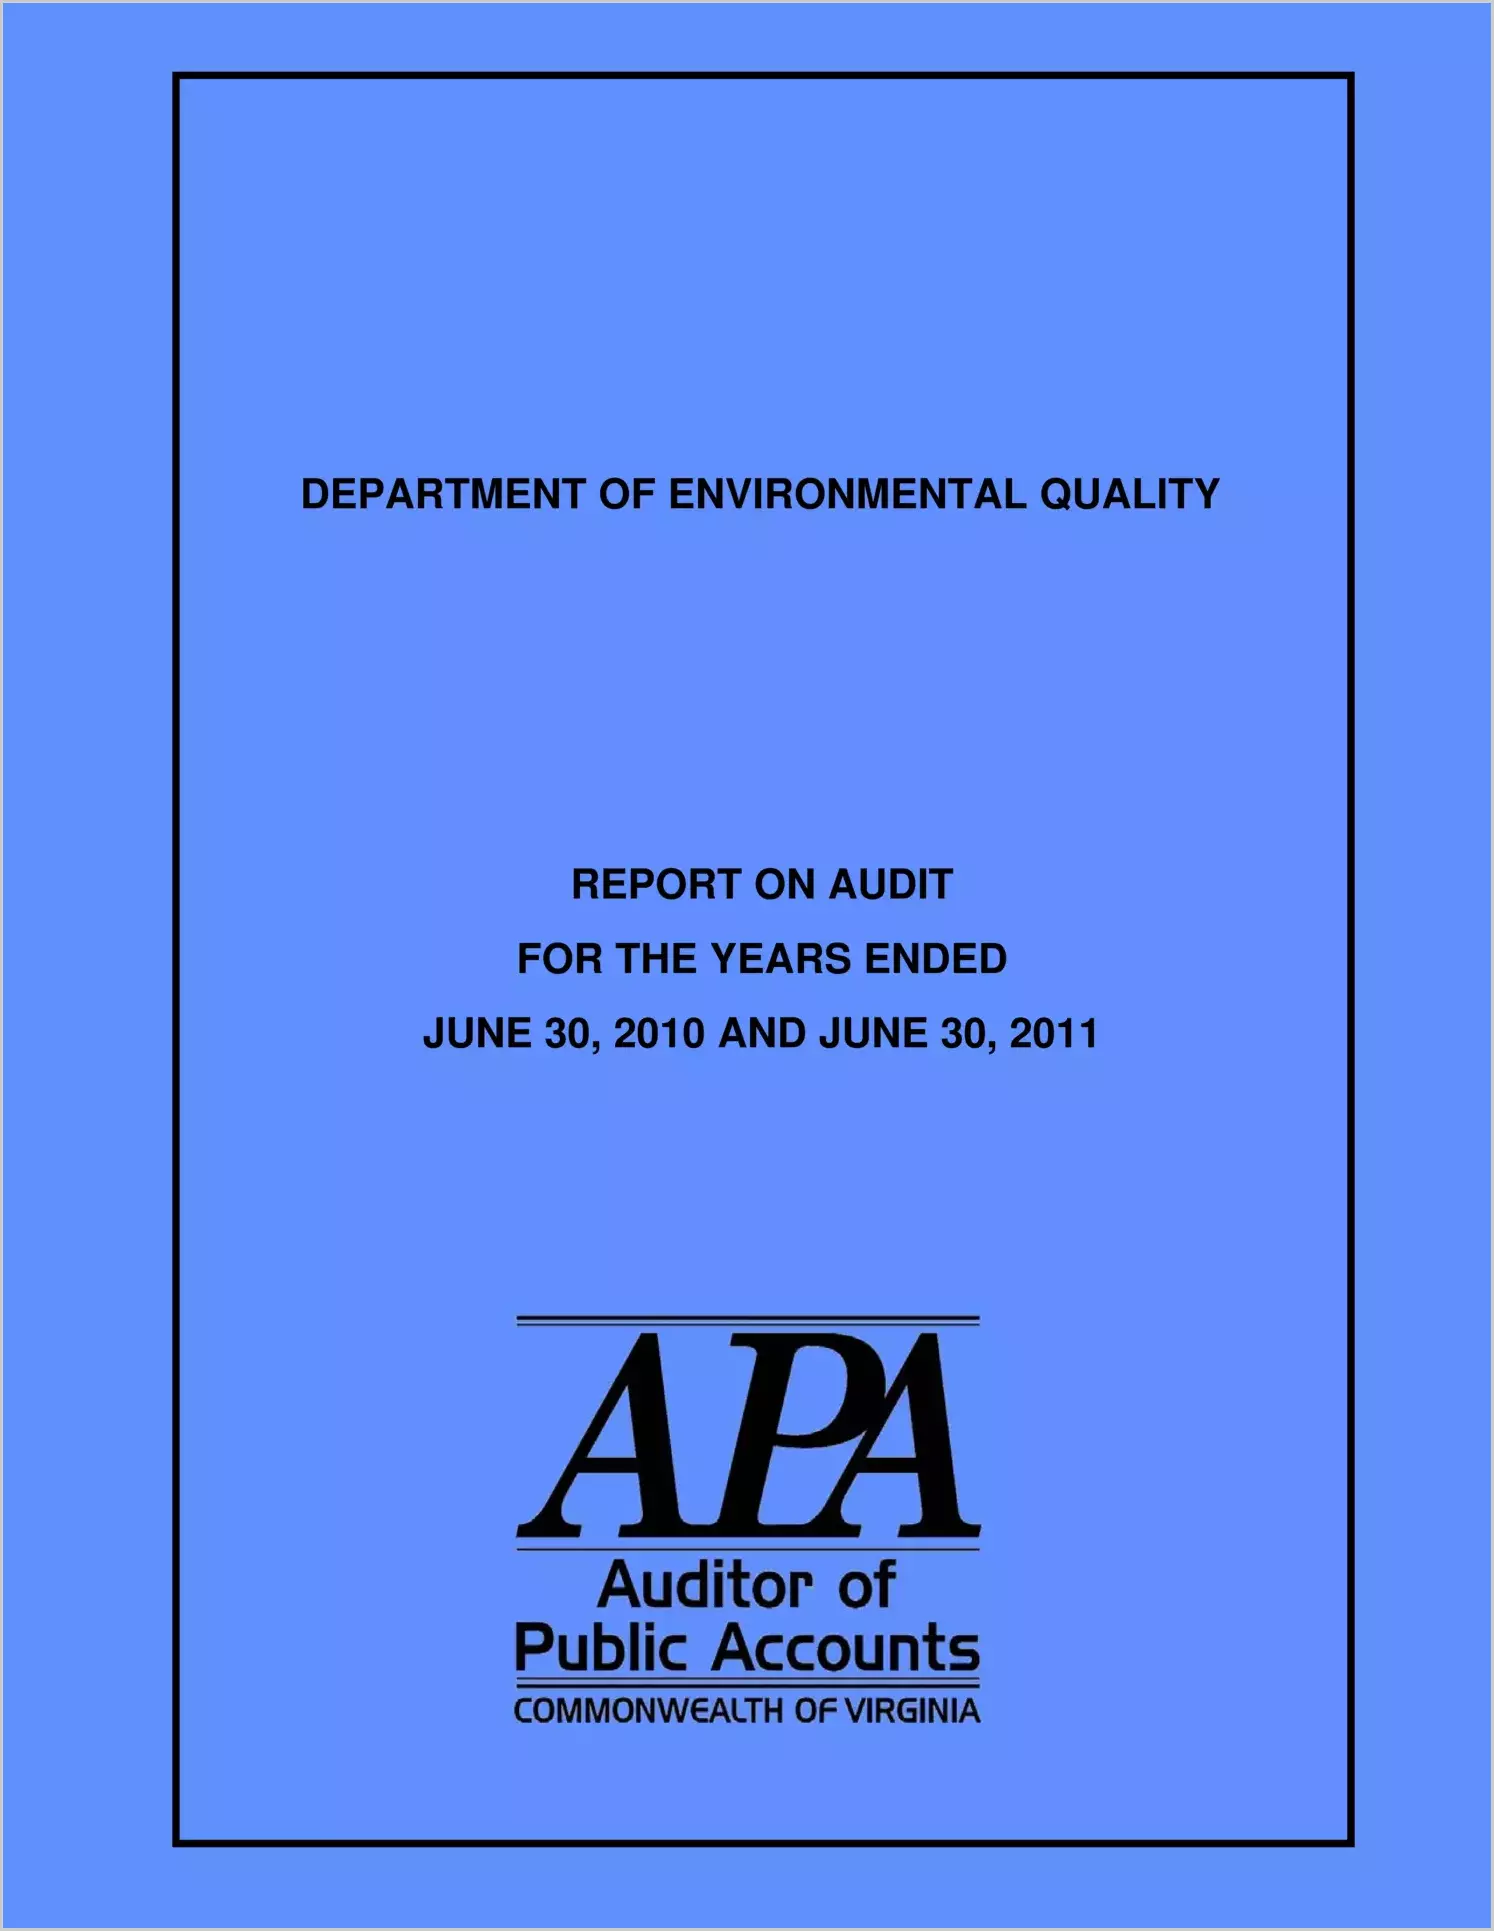 Department of Environmental Quality - for years ending June 30, 2010 and June 30, 2011